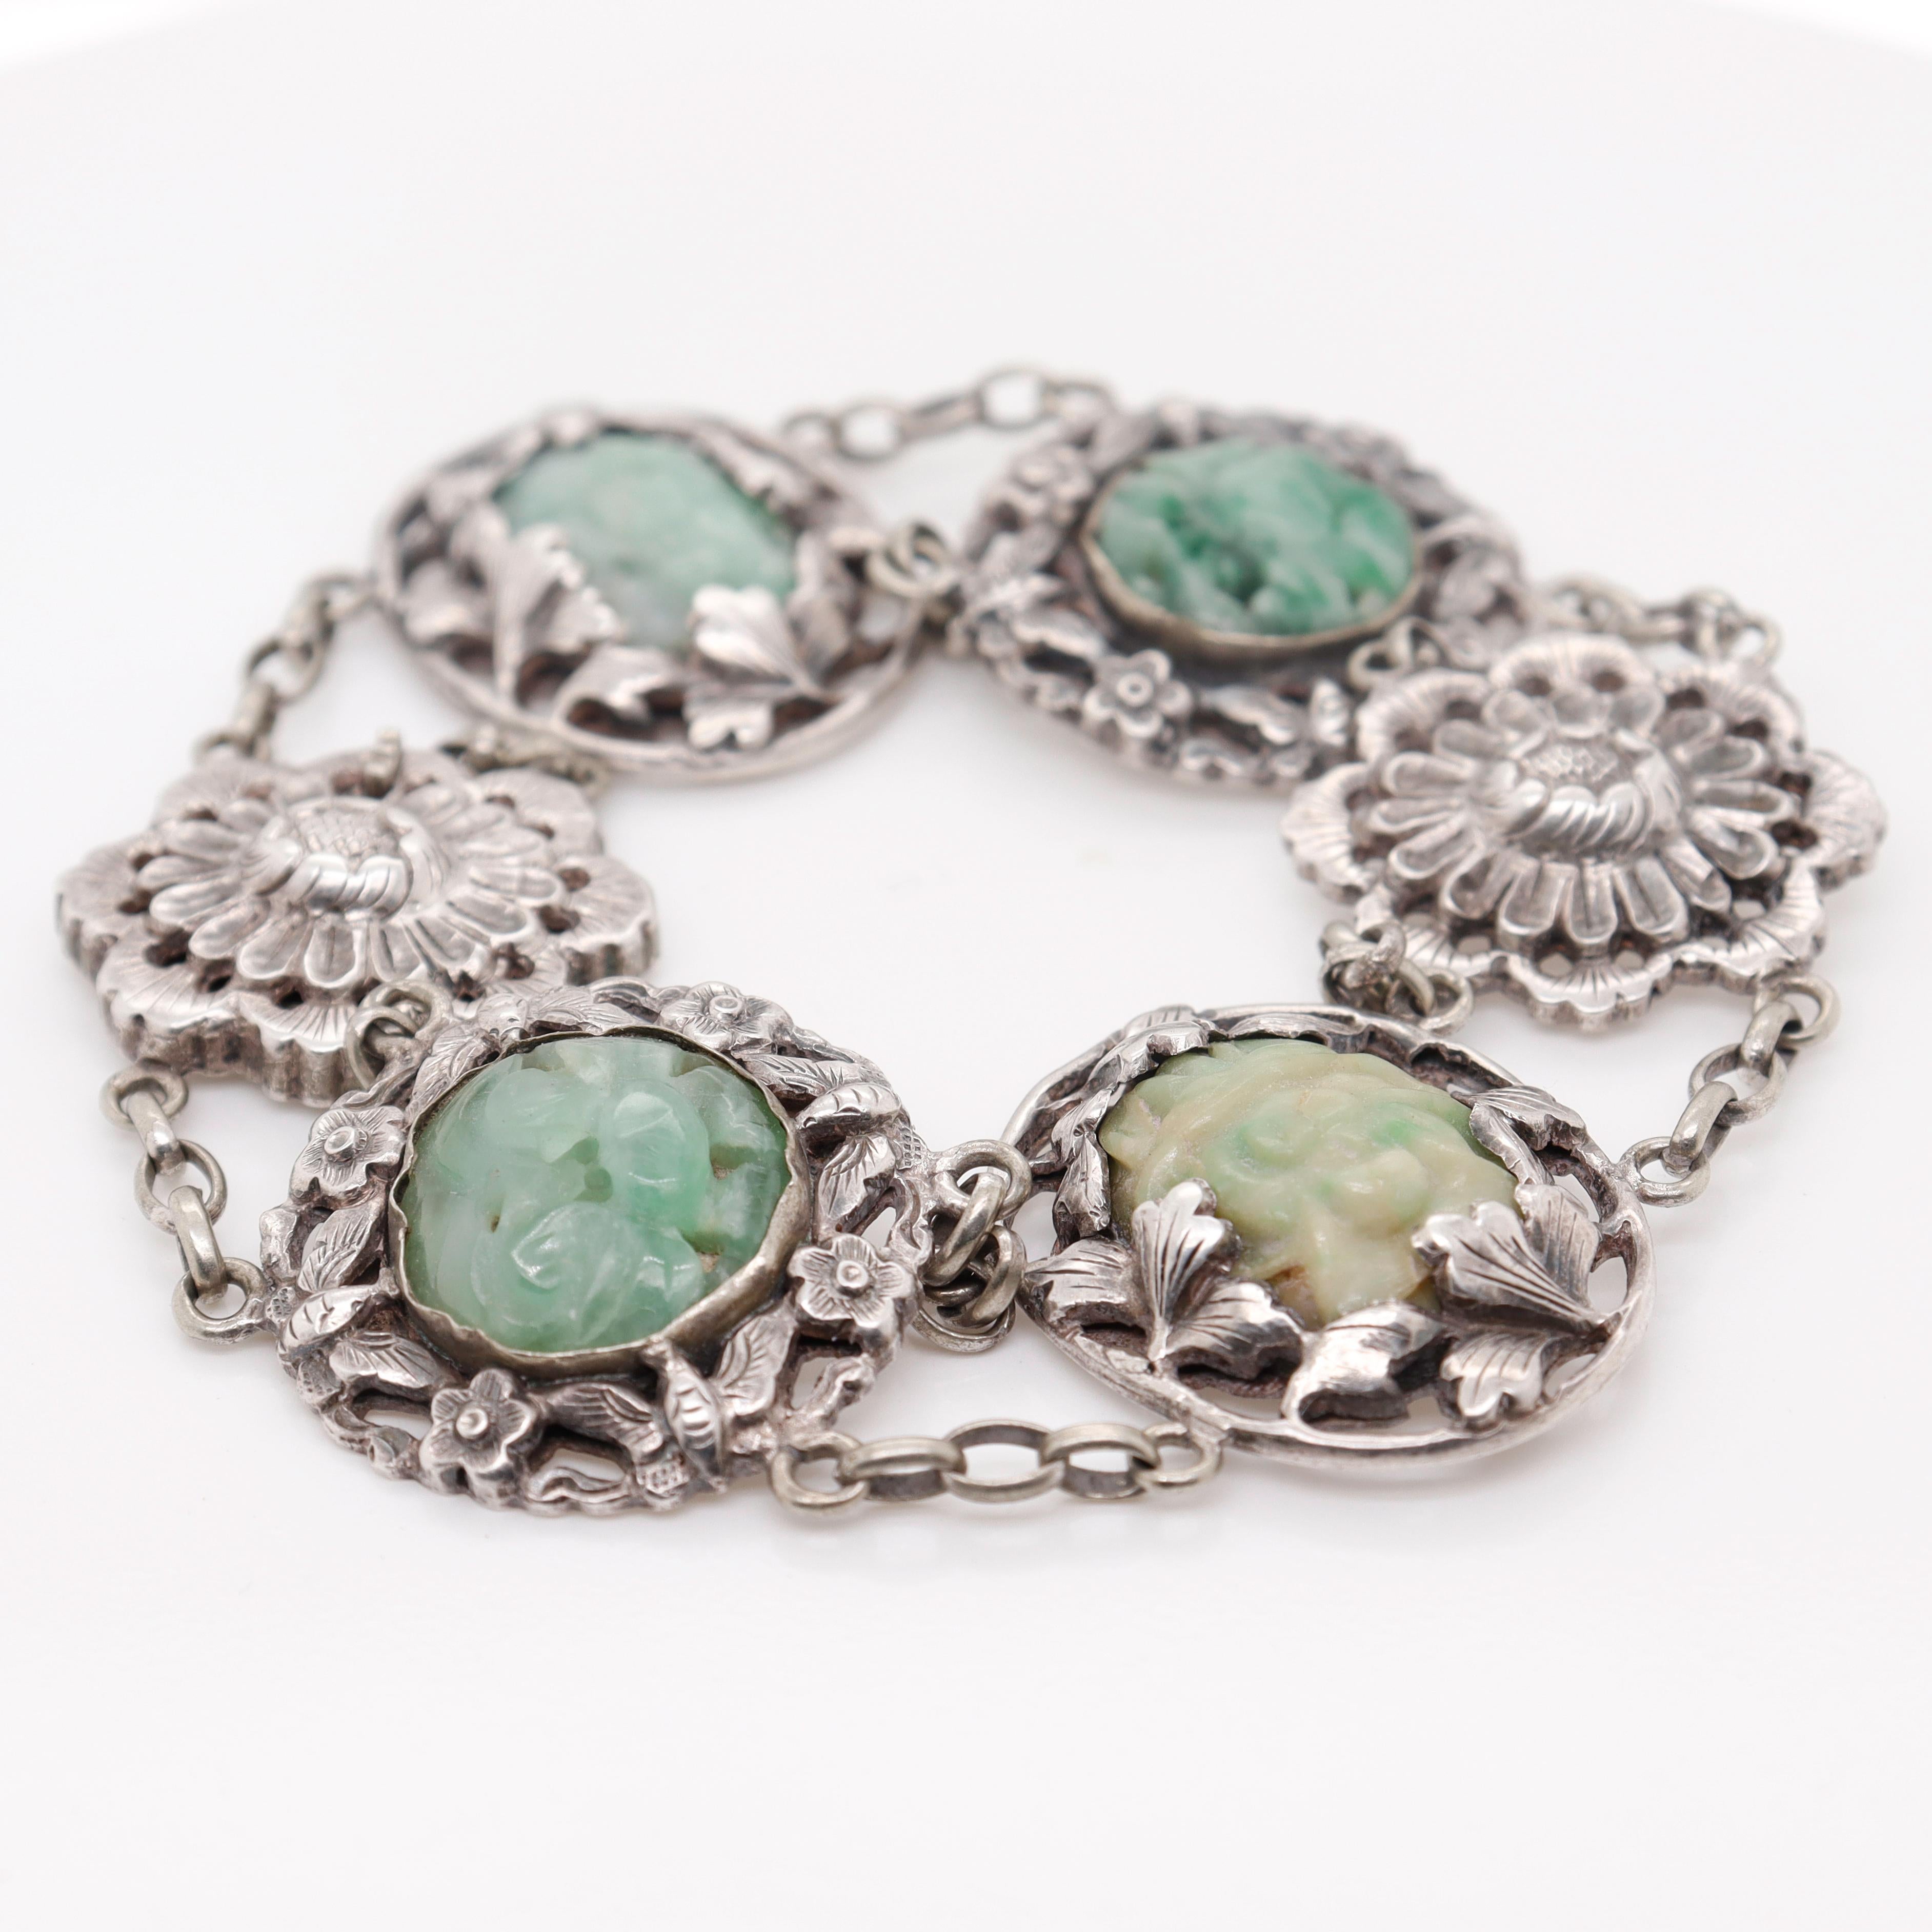 A fine signed Chinese bracelet.

Consisting of 6 silver medallions linked by oval cable chain links. 

Four Medallions have small carved jadeite plaques.

Marked to the reverse with characters.

Simply a wonderful piece of Chinese